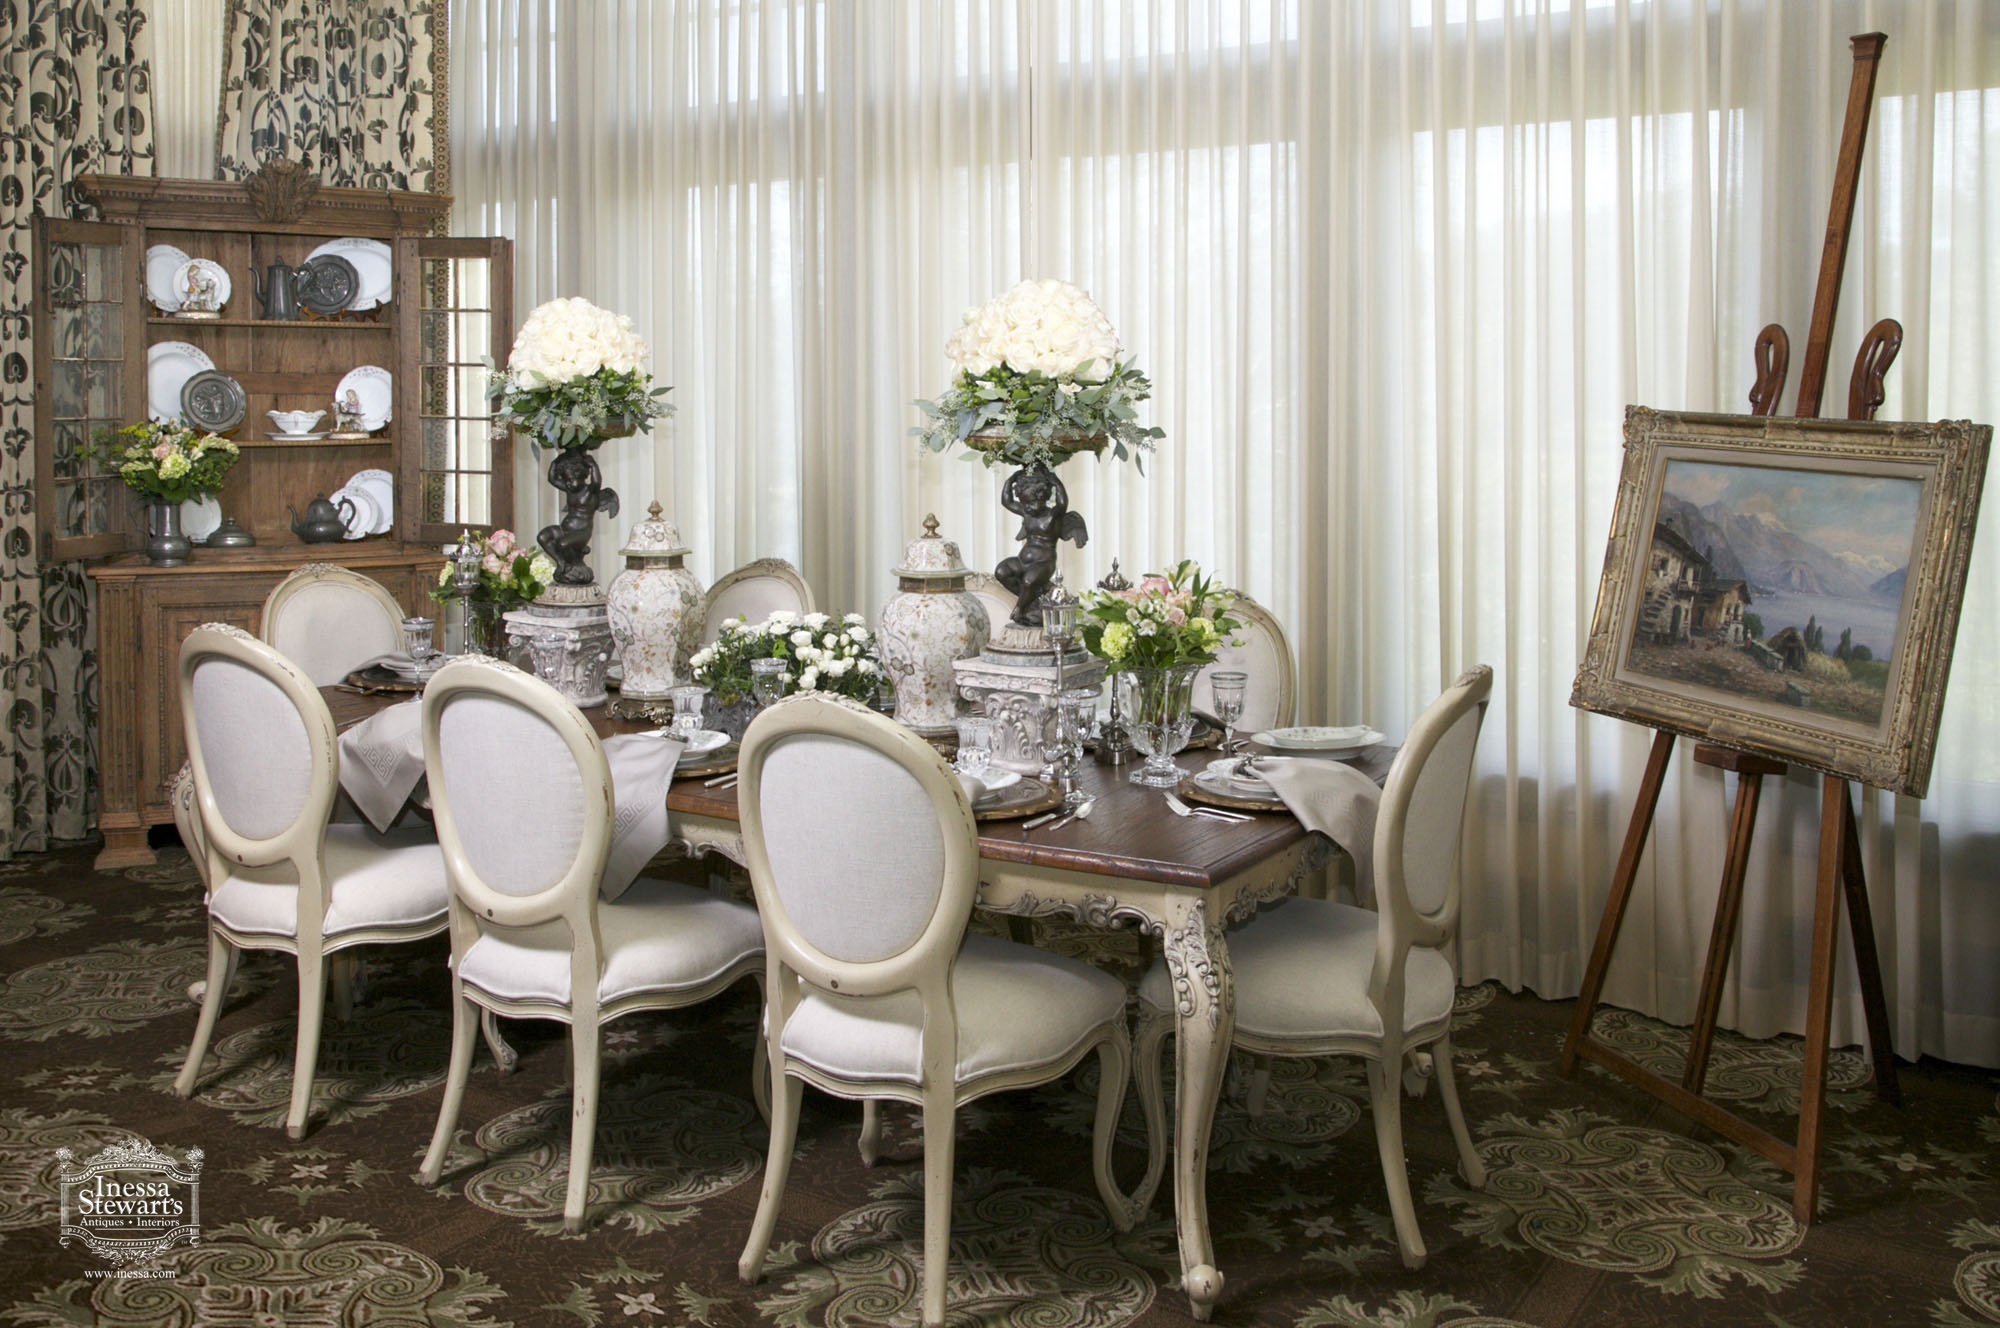 Antique Dining Room Setting and Accessories -Tablescapes